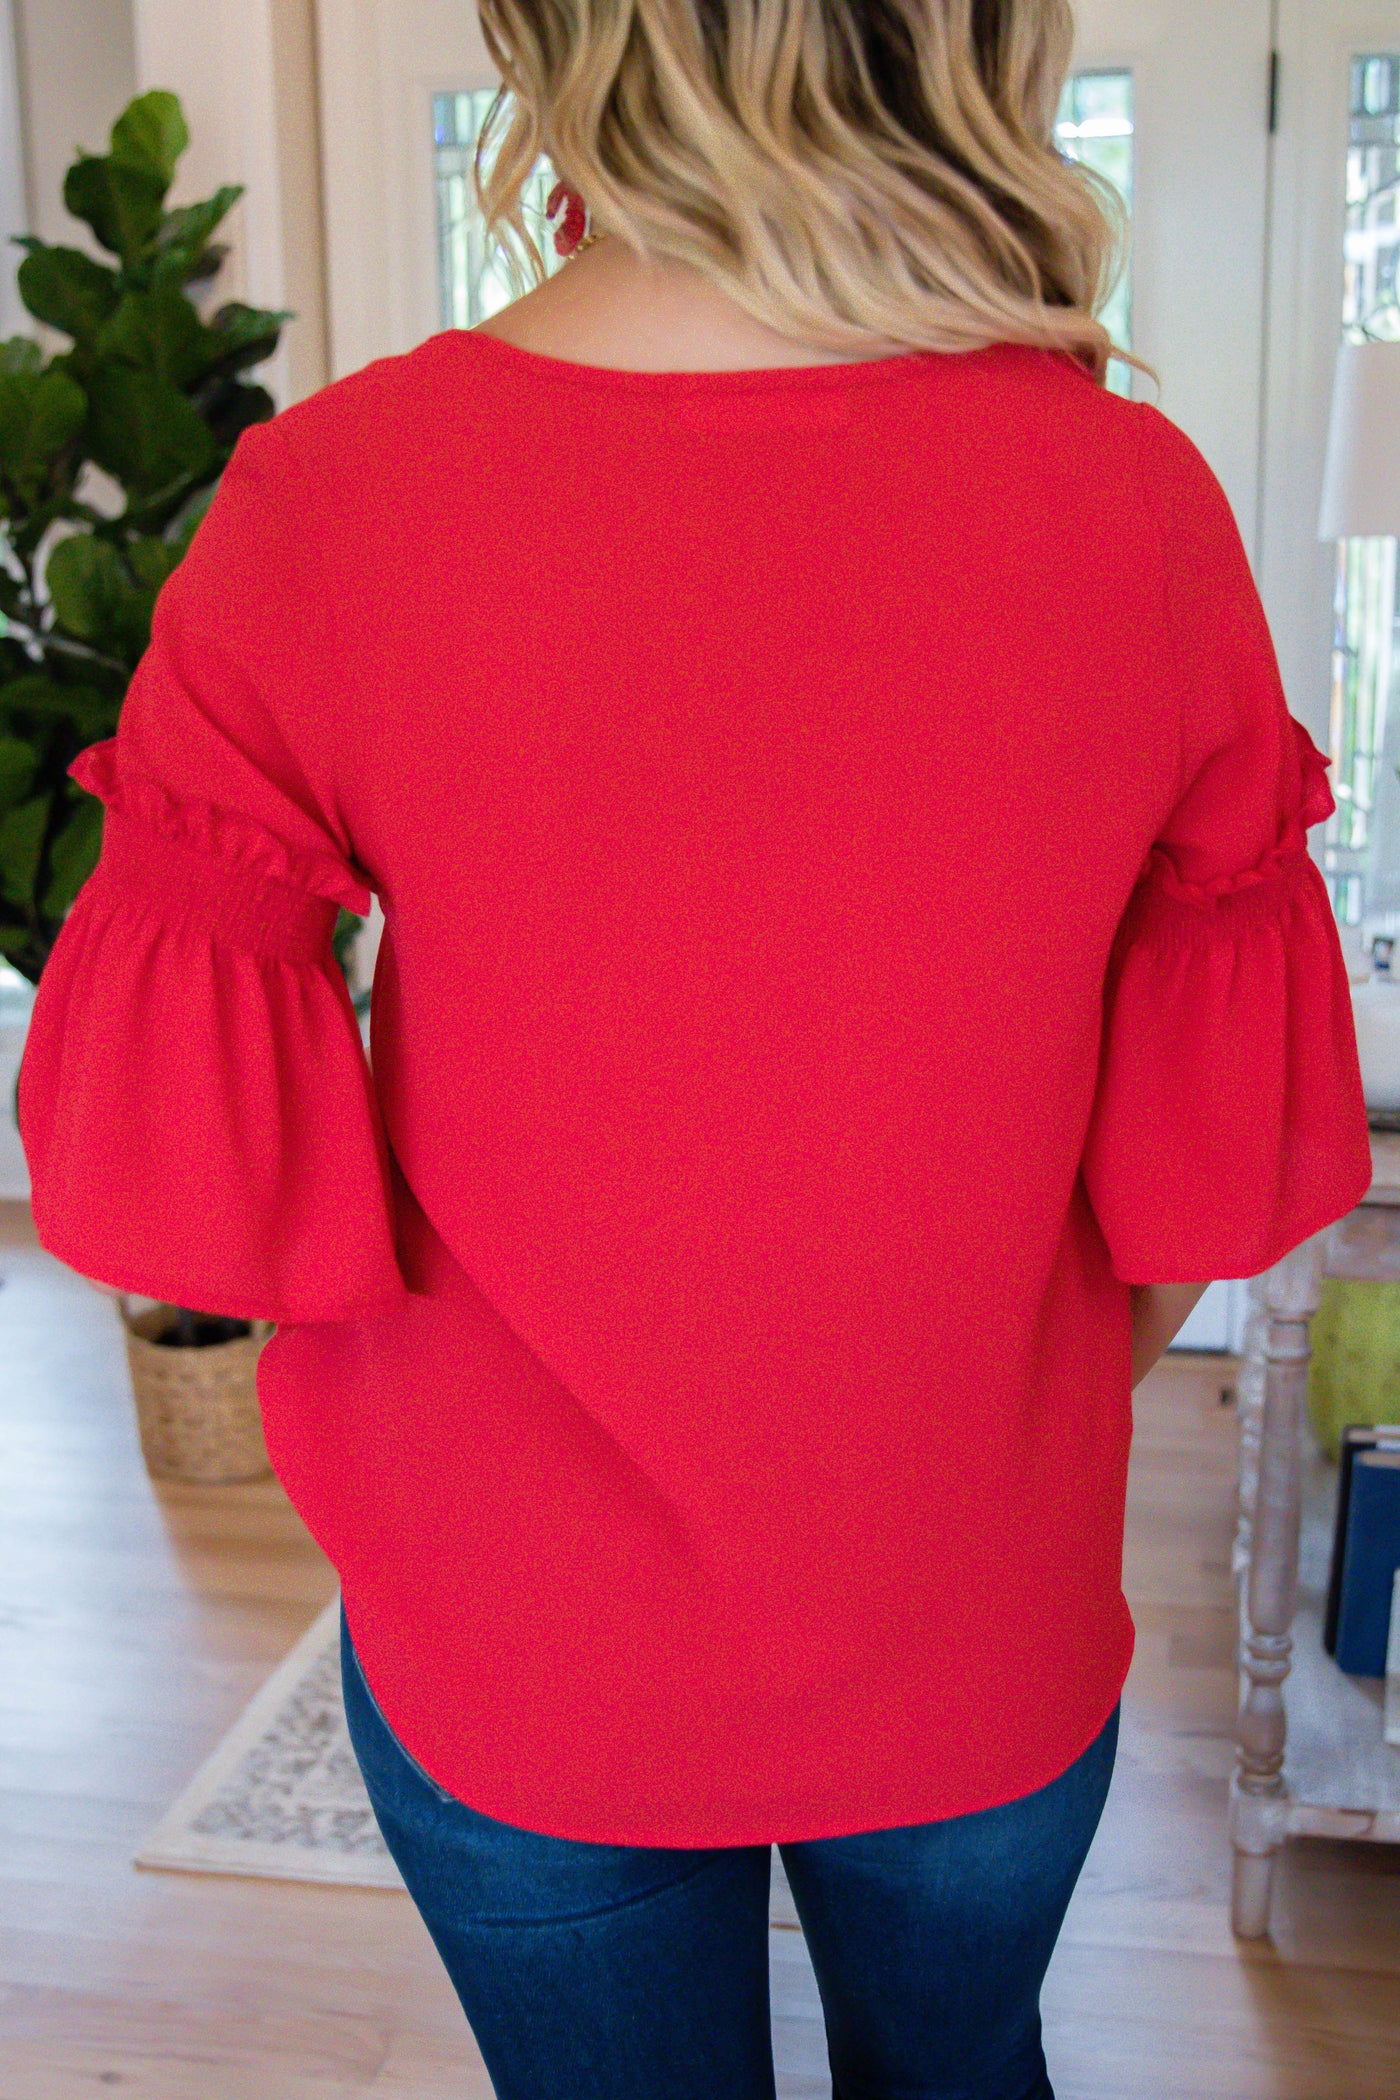 Red V-Neck Blouse- Women's Workwear Top- Simple Red Blouse- Women's Top With Sleeves